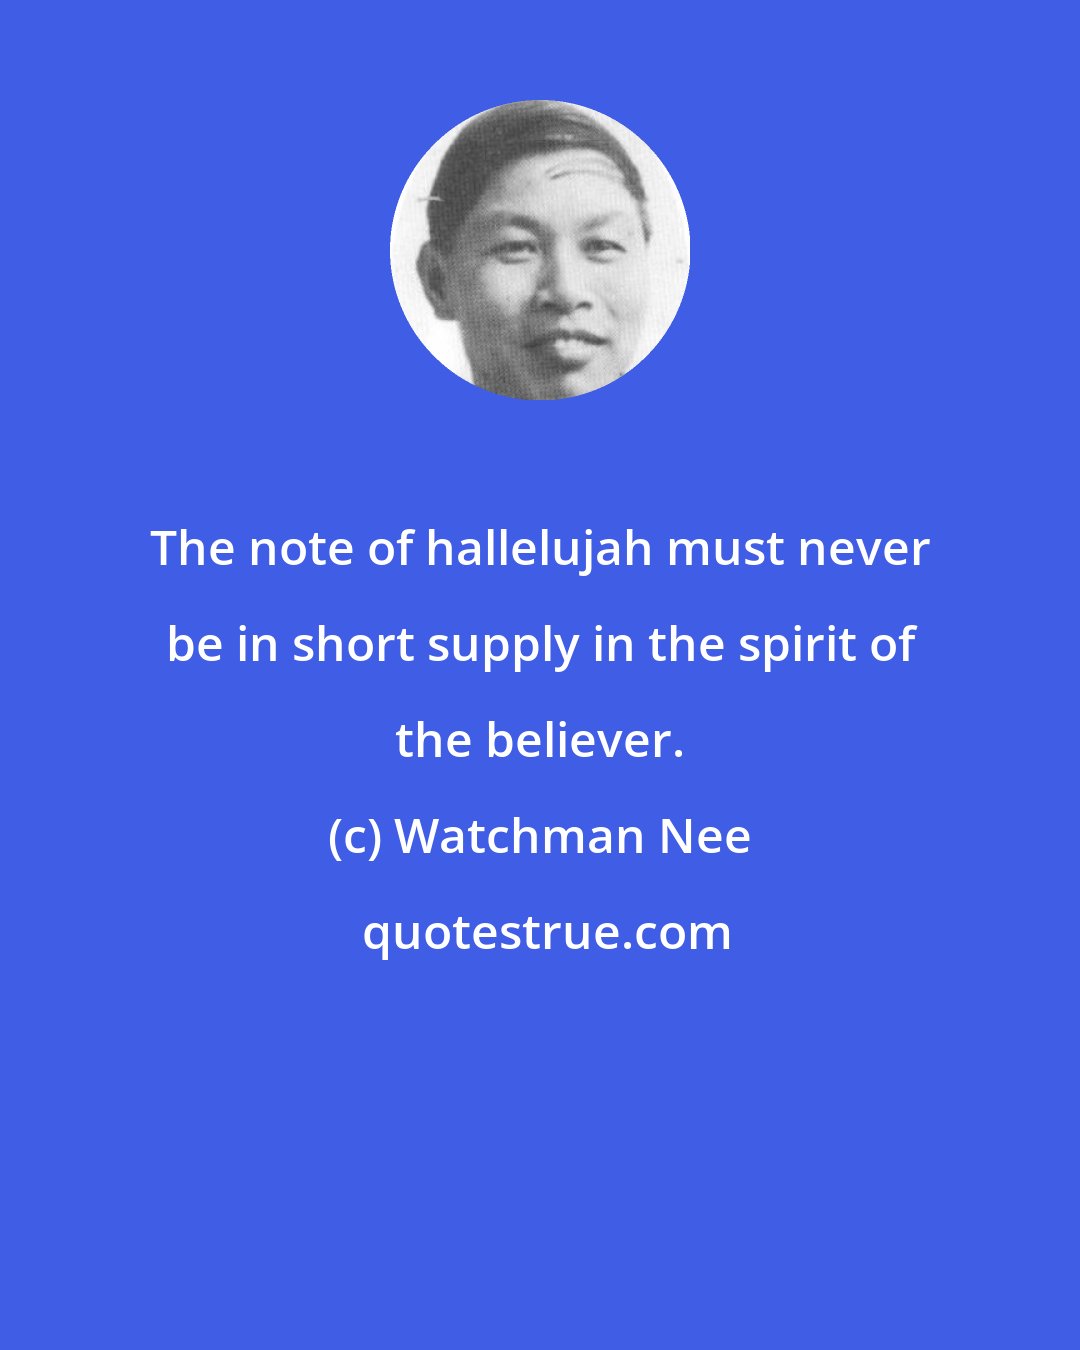 Watchman Nee: The note of hallelujah must never be in short supply in the spirit of the believer.